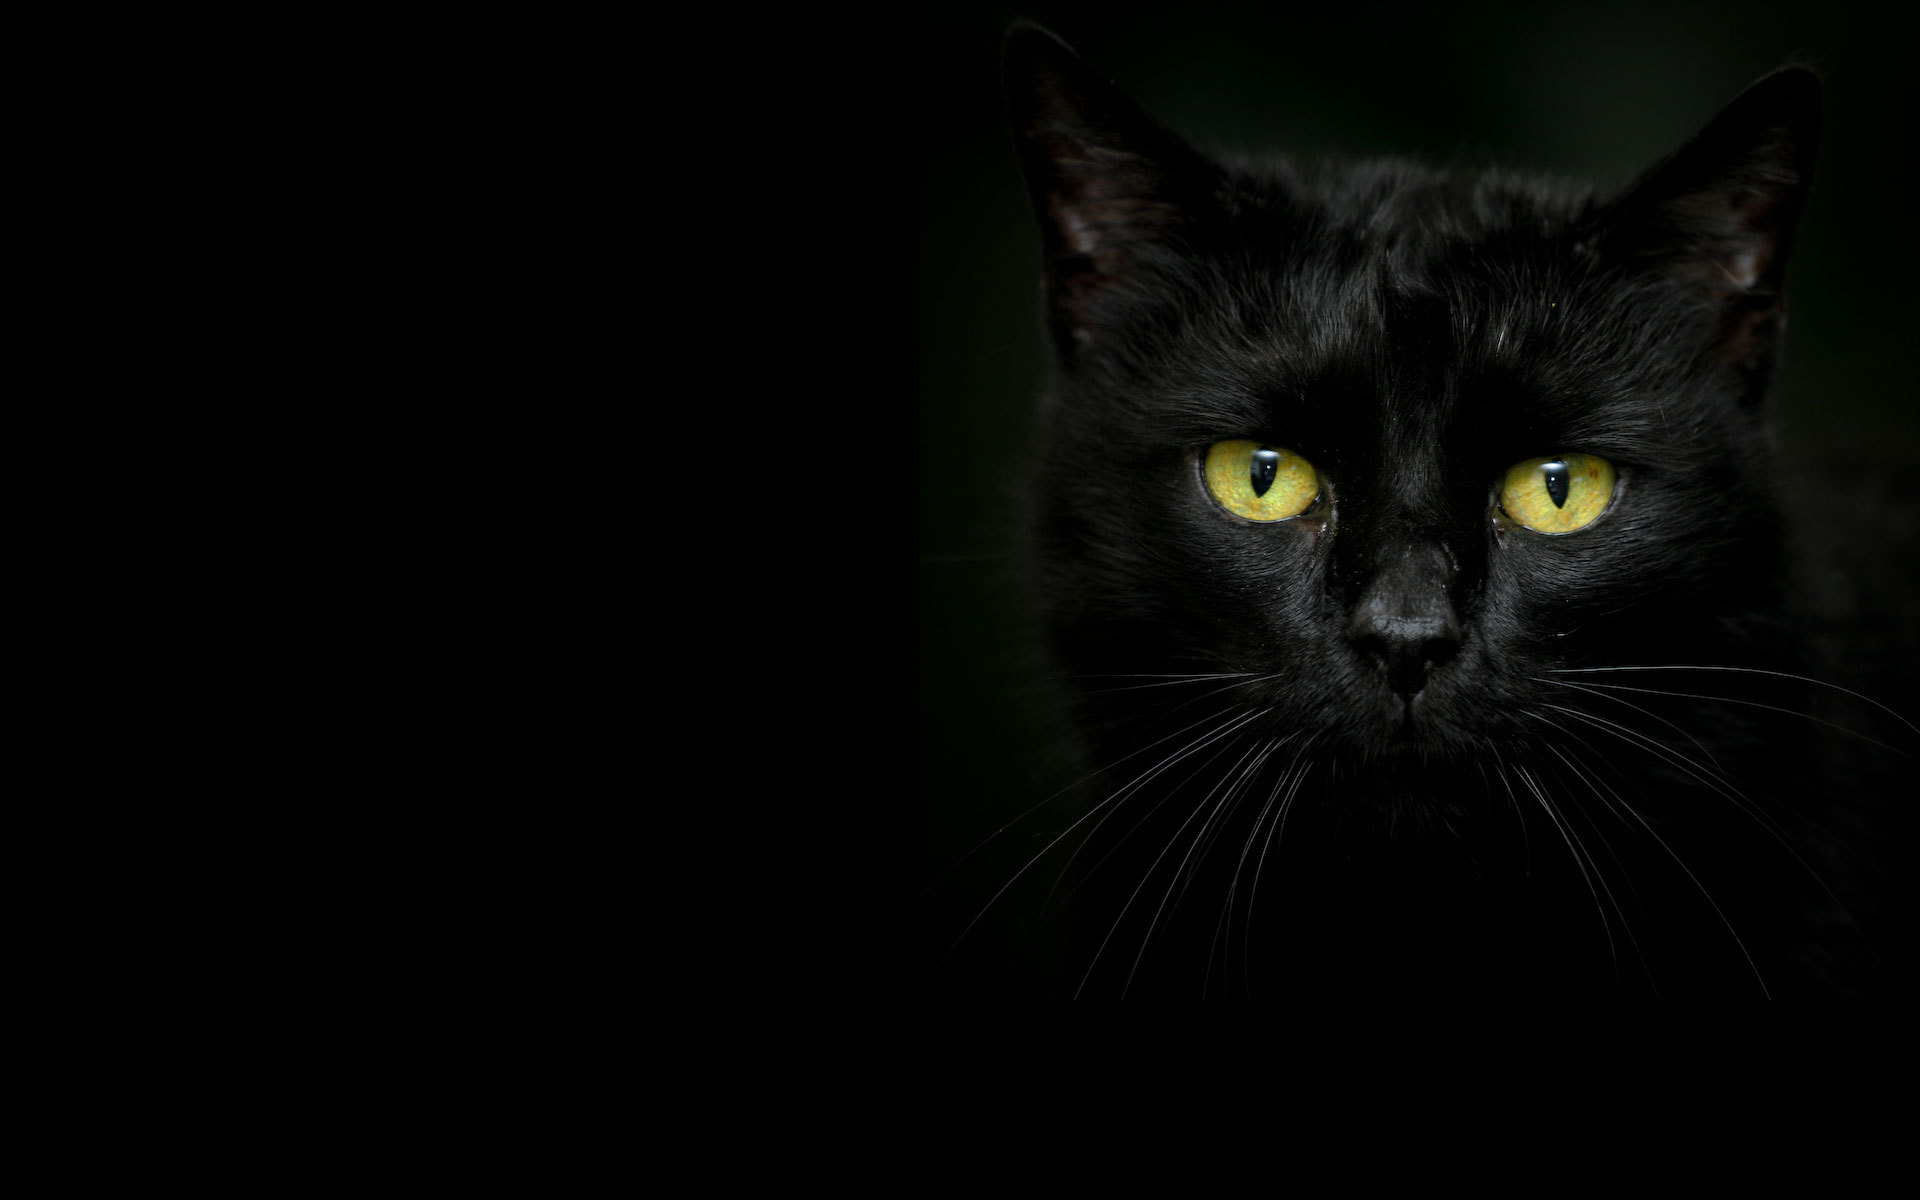 Beautiful black cat on a dark background wallpapers and images 1920x1200